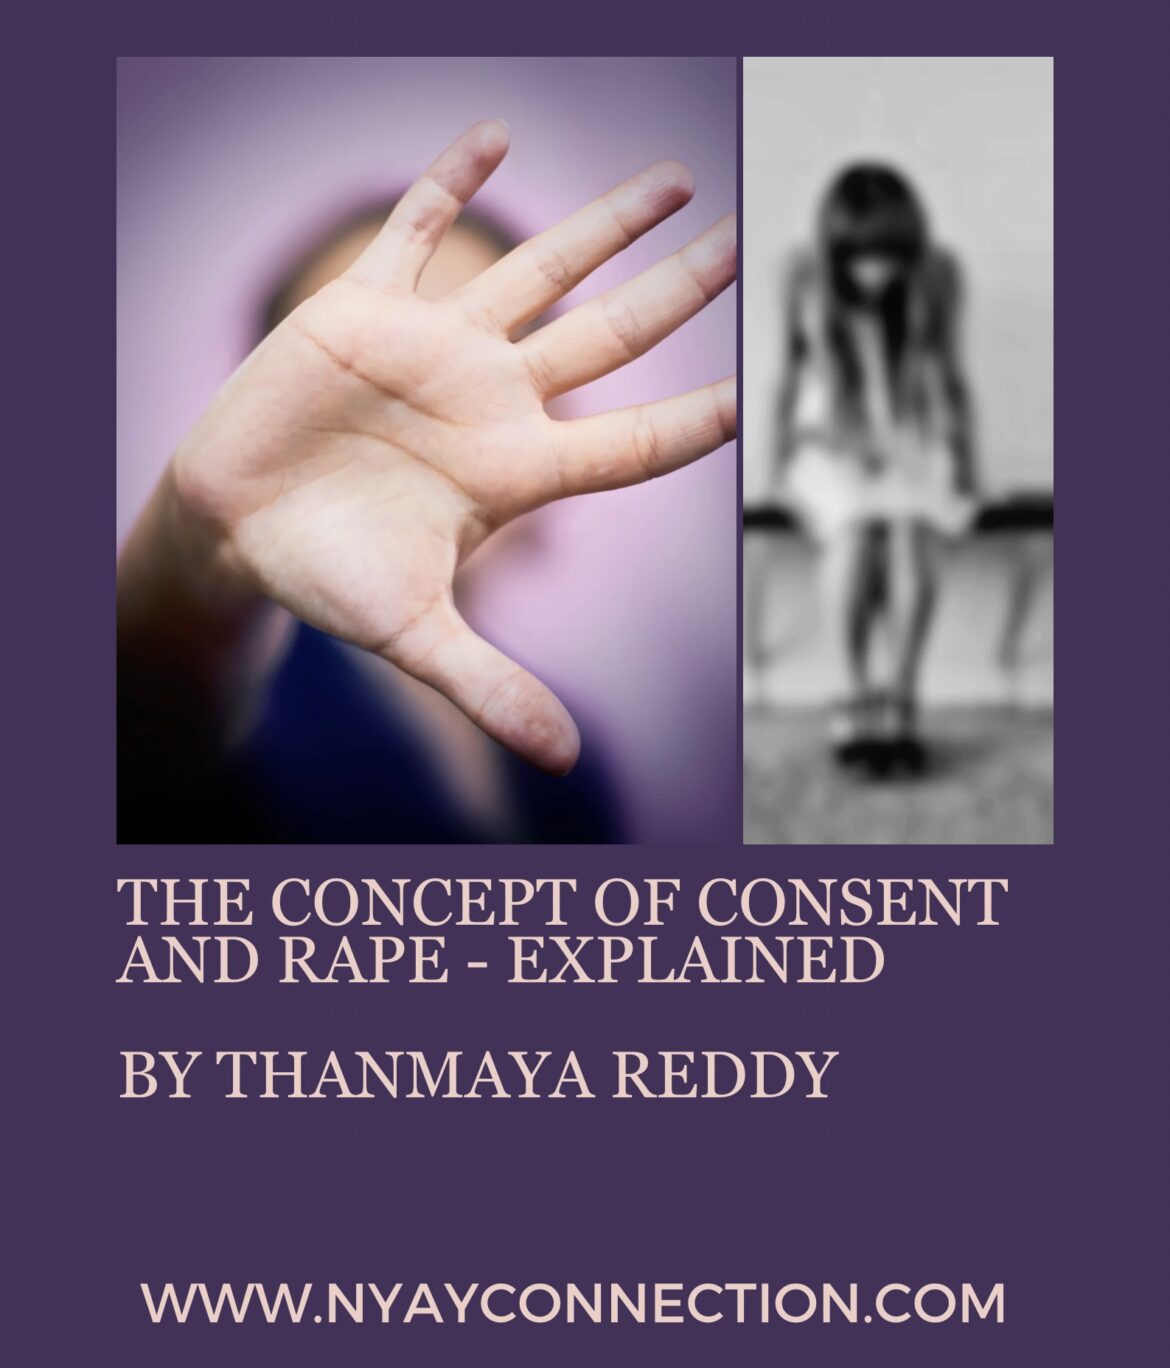 AN ANALYSIS OF CONSENSUAL INTERCOURSE AND RAPE IN LIGHT OF RECENT JUDGEMENTS